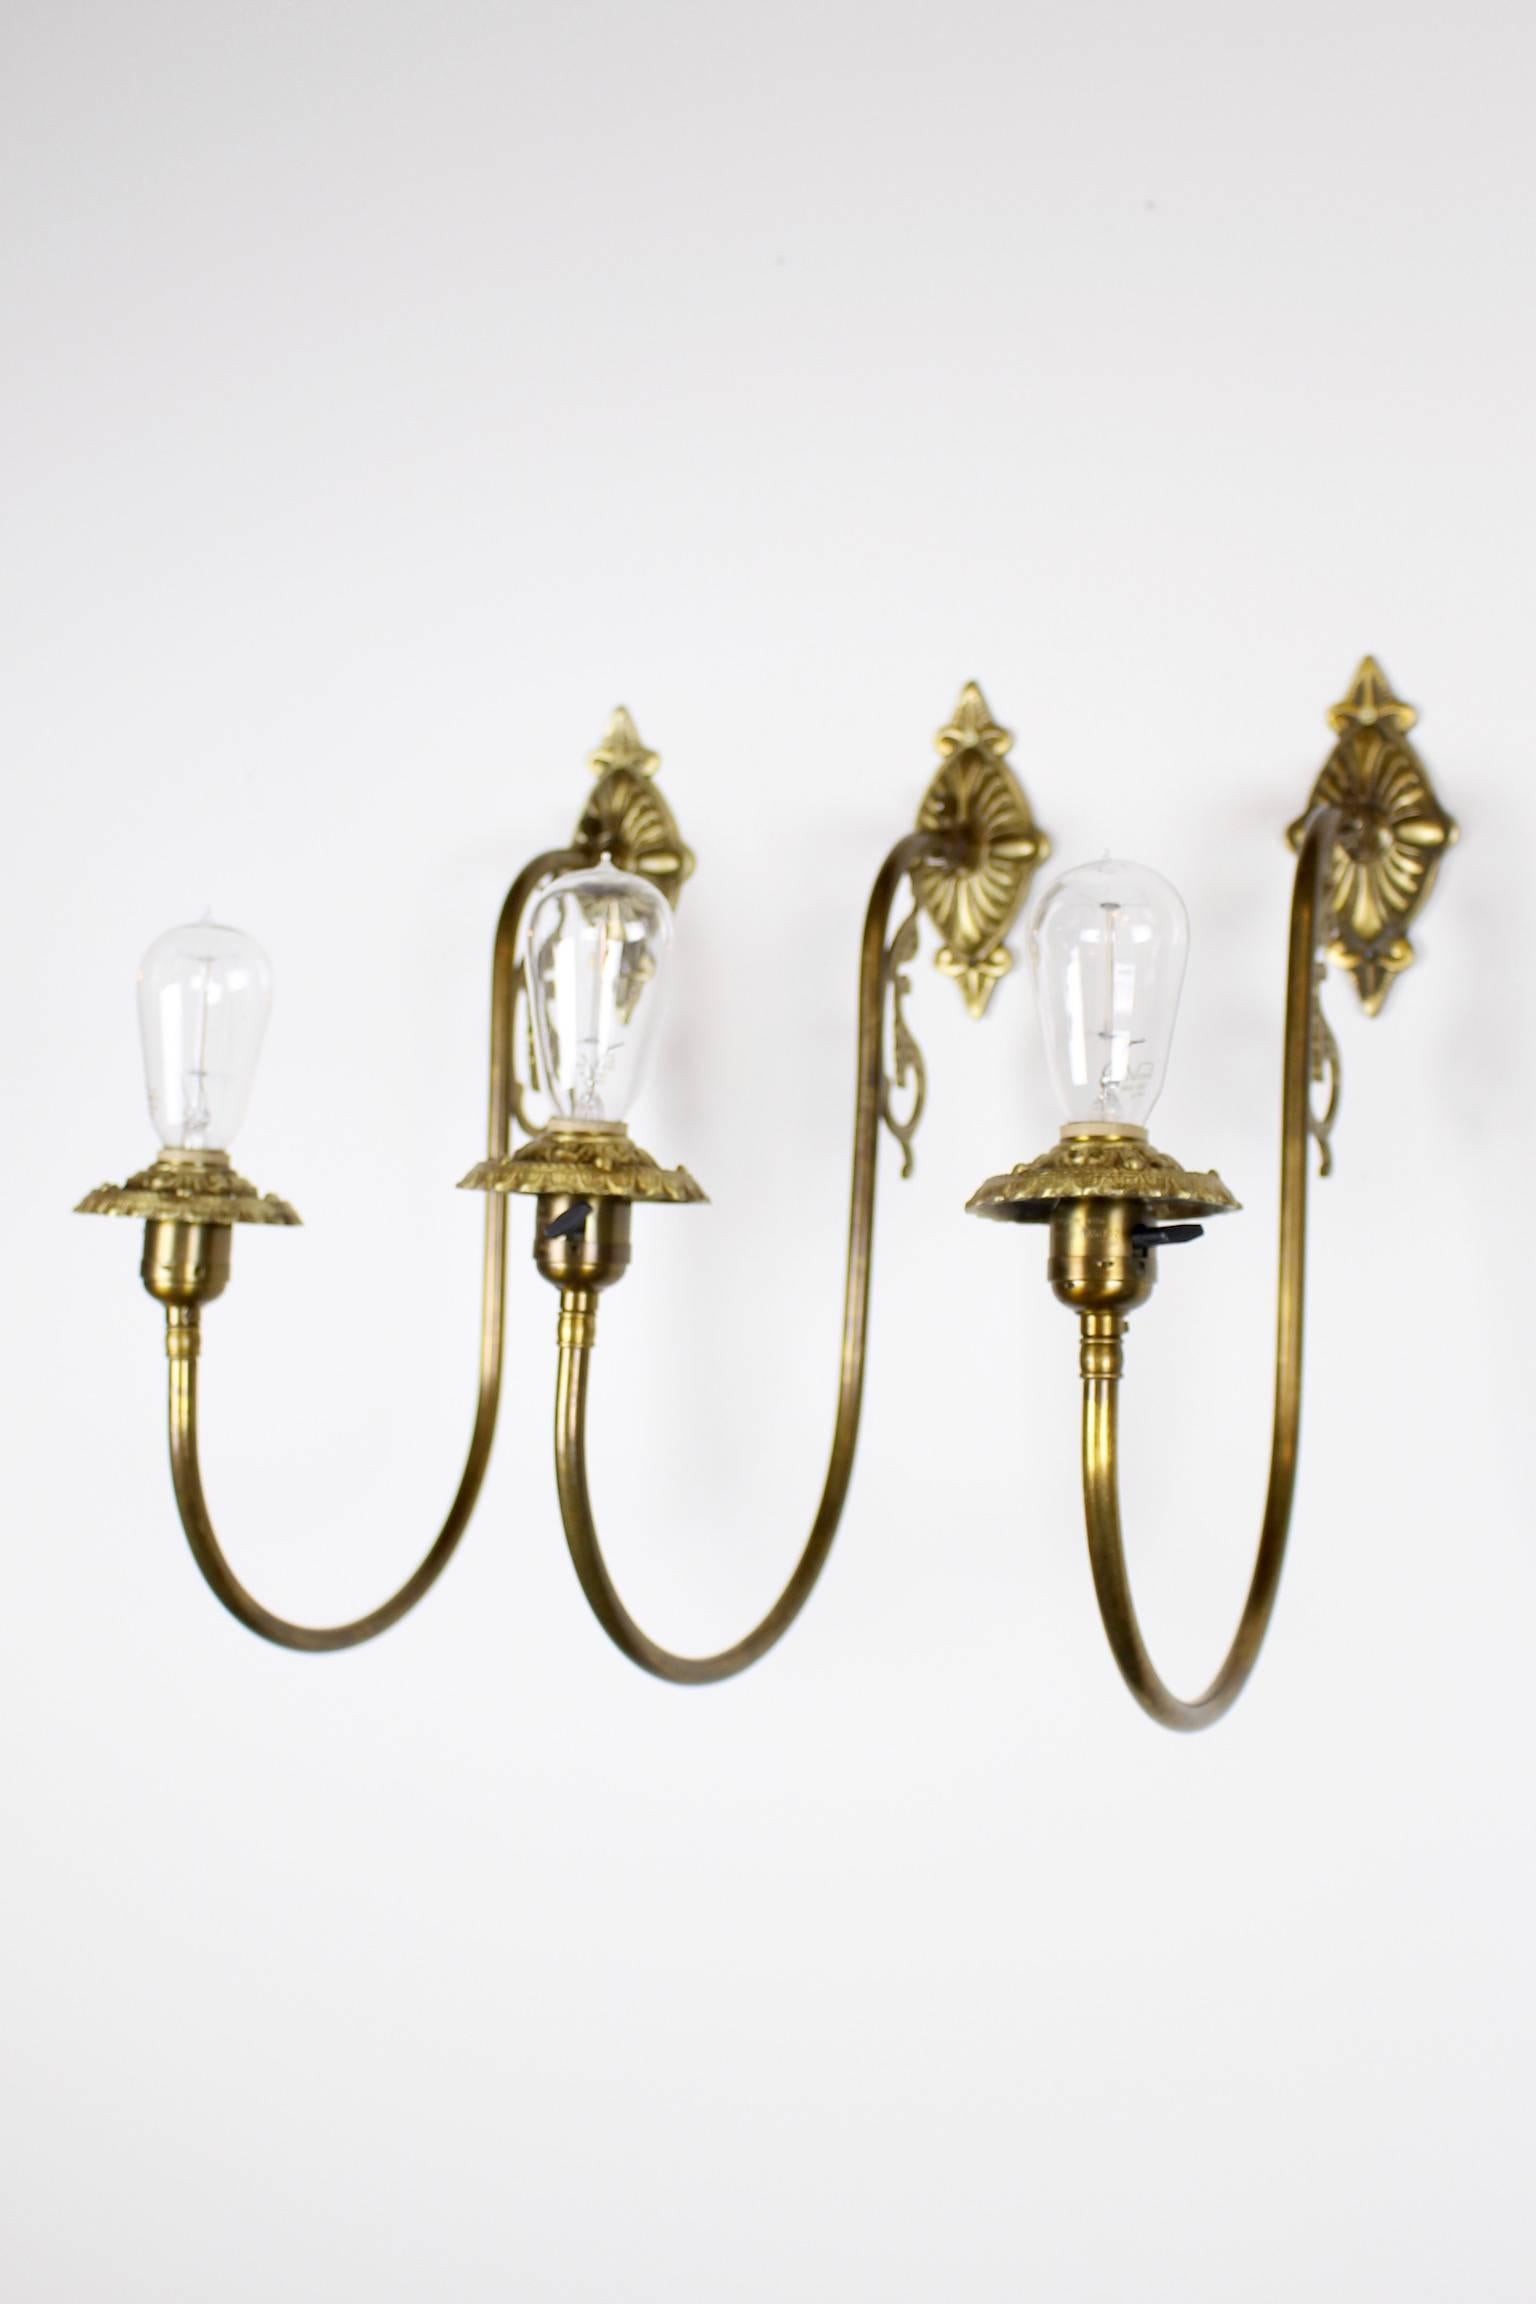 This set of three Victorian style brass wall scones were converted from gas to electricity, circa 1910. They are fitted with bare tungsten bulbs and implore a sense of quirk and whimsy with their airy Silhouette. These sconces bring instant